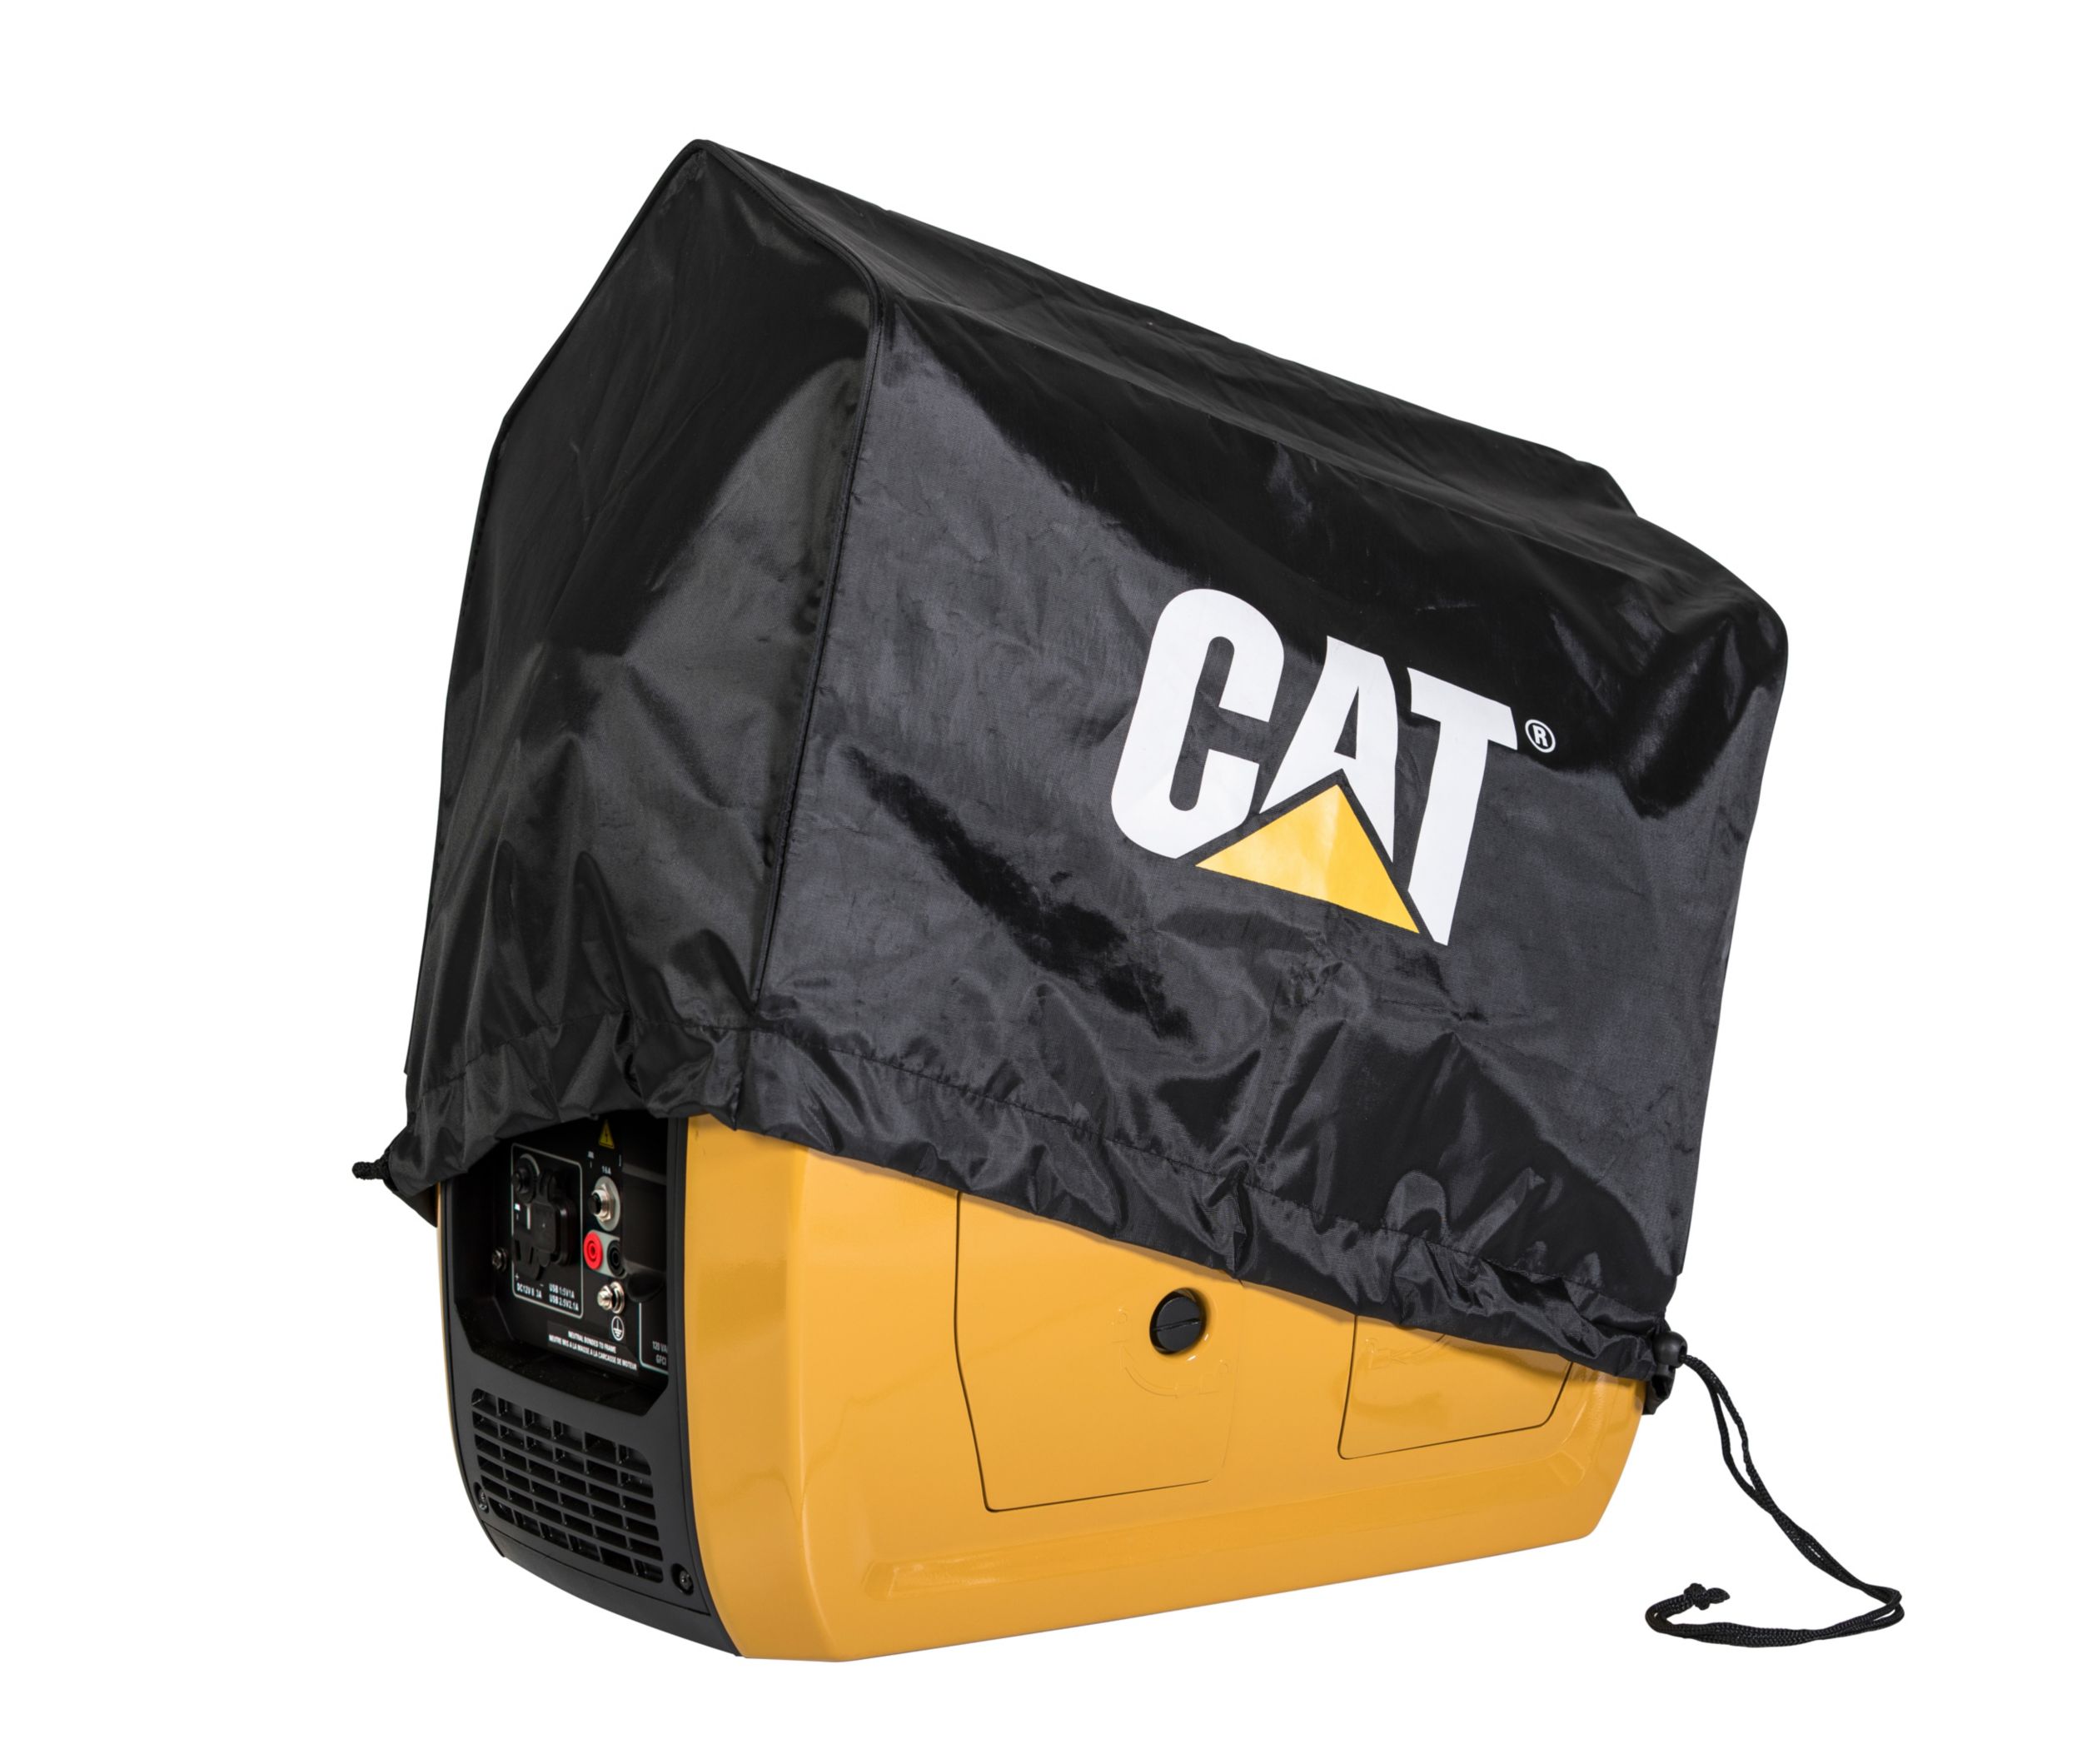 Generator Cover for INV1250, INV2000 and INV2250